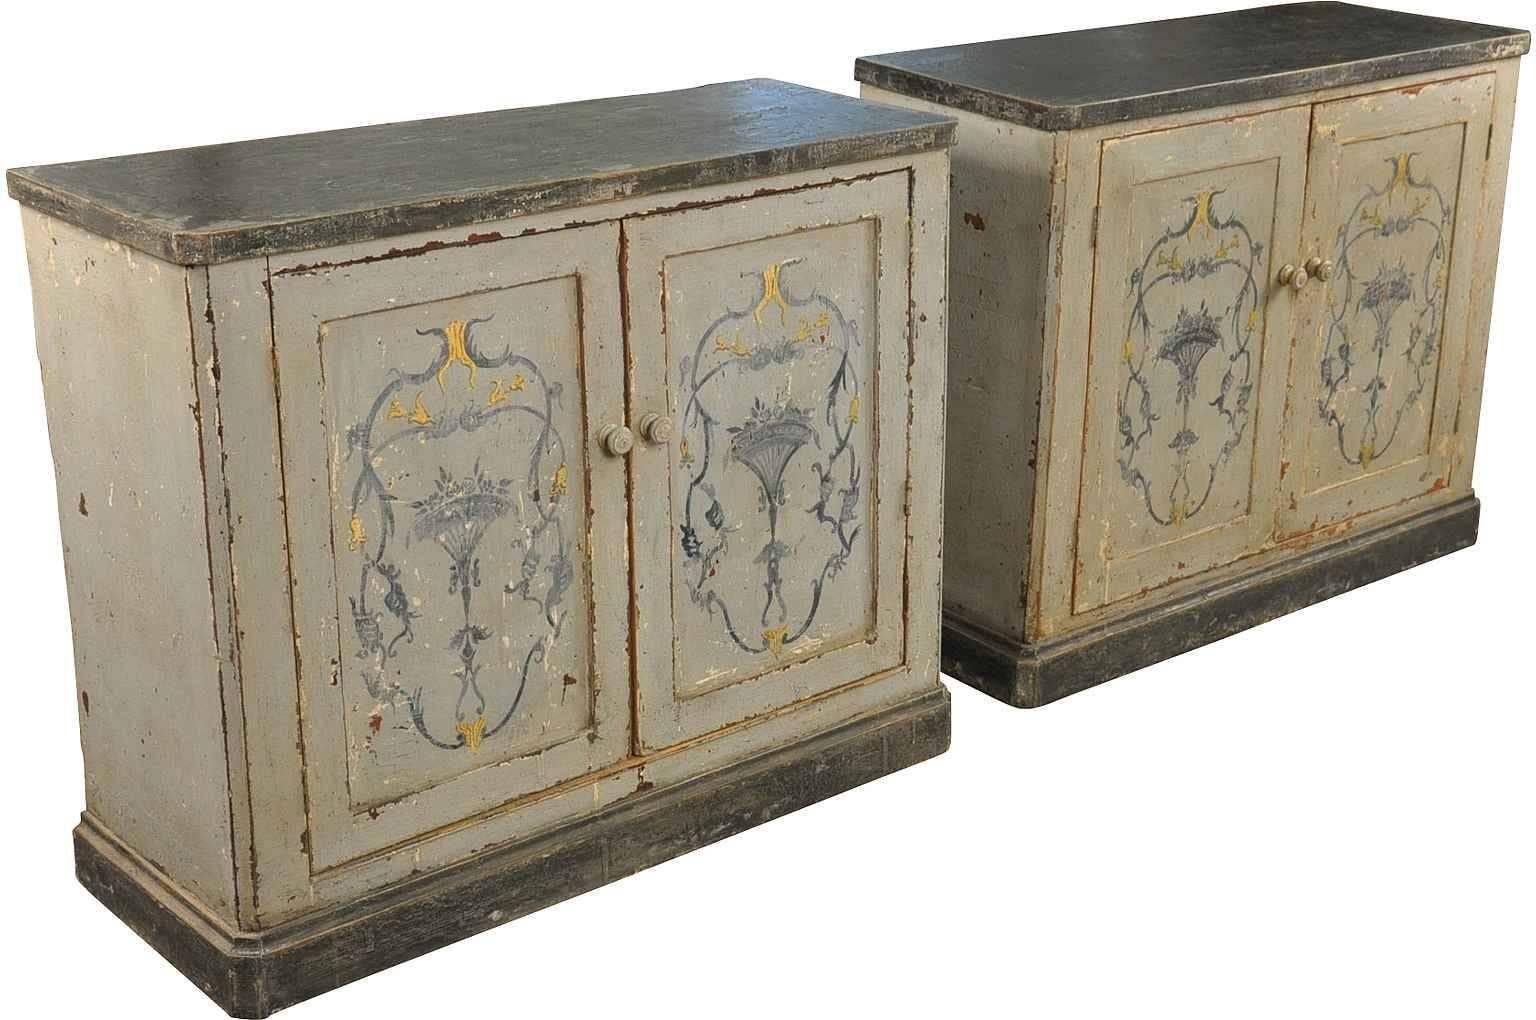 A charming pair of mid-19th century painted buffets from Portugal. The wonderful and textured finish is in hues of a Classic grey, almost black top surfaces and lovely decorative painting. These pieces are wonderful in any living situation and also